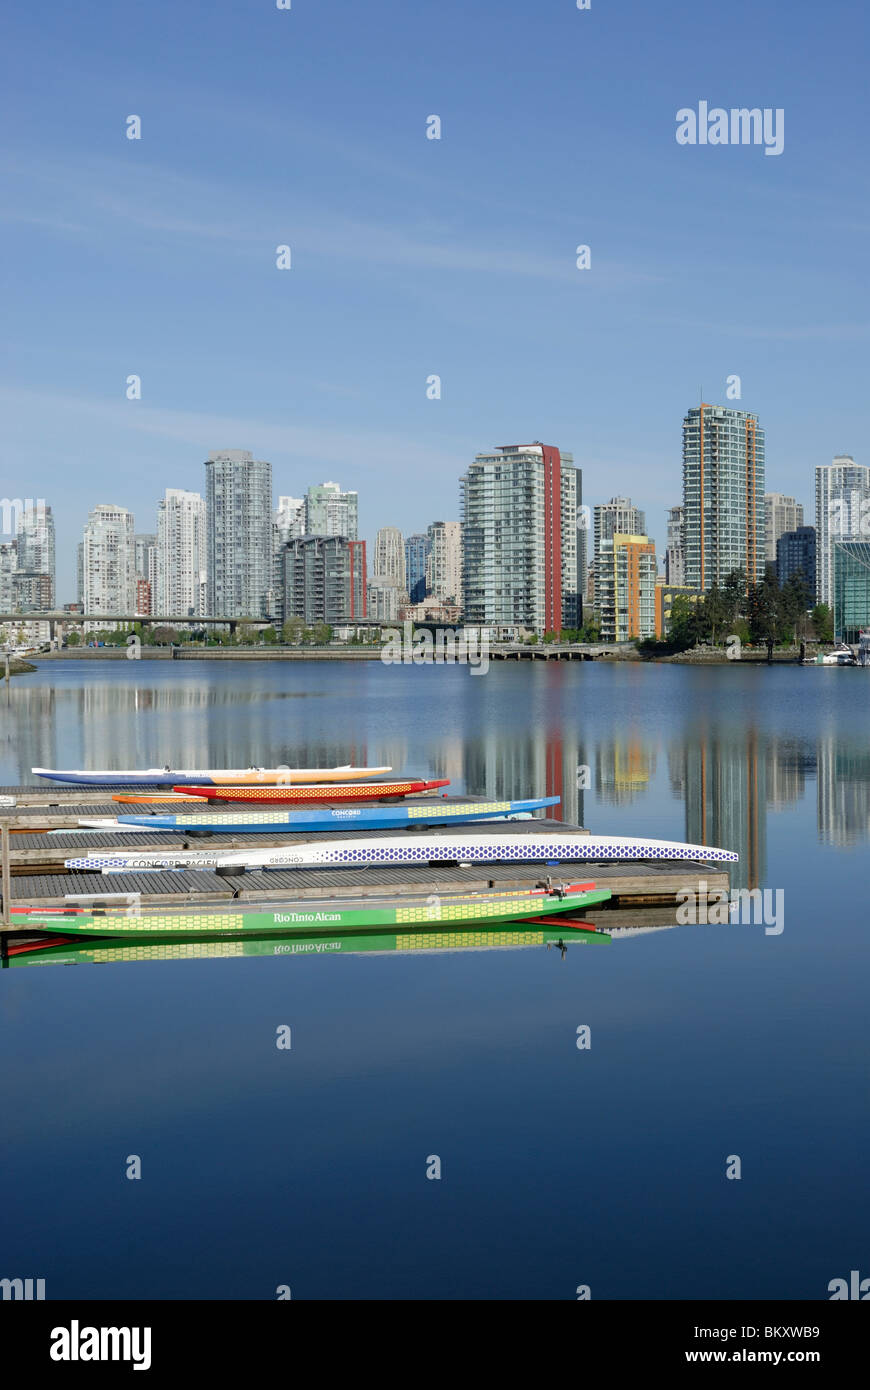 Skyline of False Creek, in Beautiful Vancouver City, with resting Dragon Boats in the foreground. Stock Photo